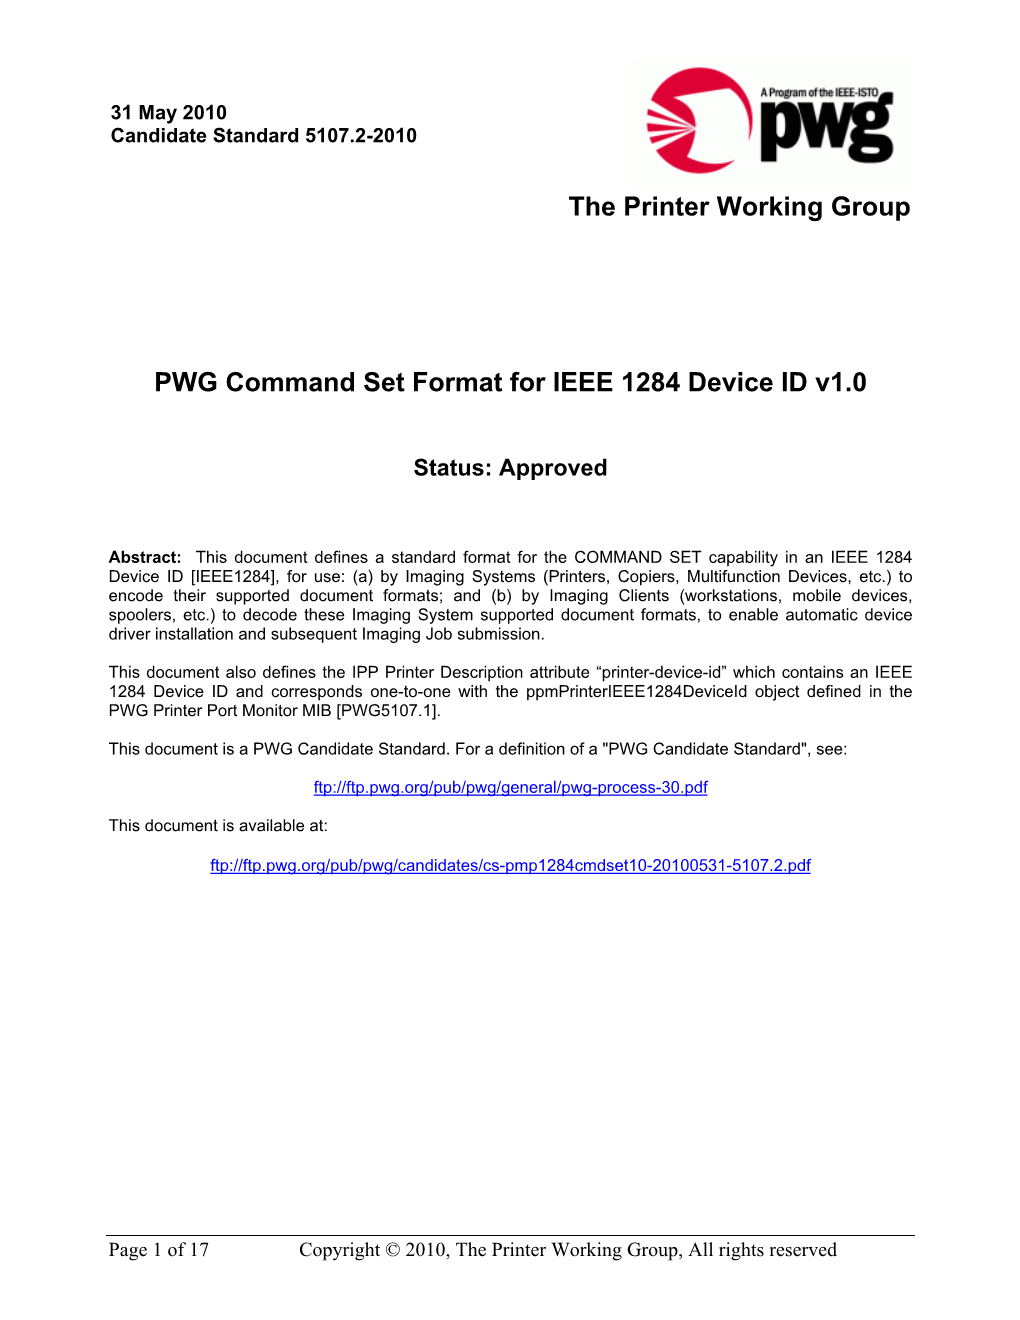 The Printer Working Group PWG Command Set Format for IEEE 1284 Device ID V1.0